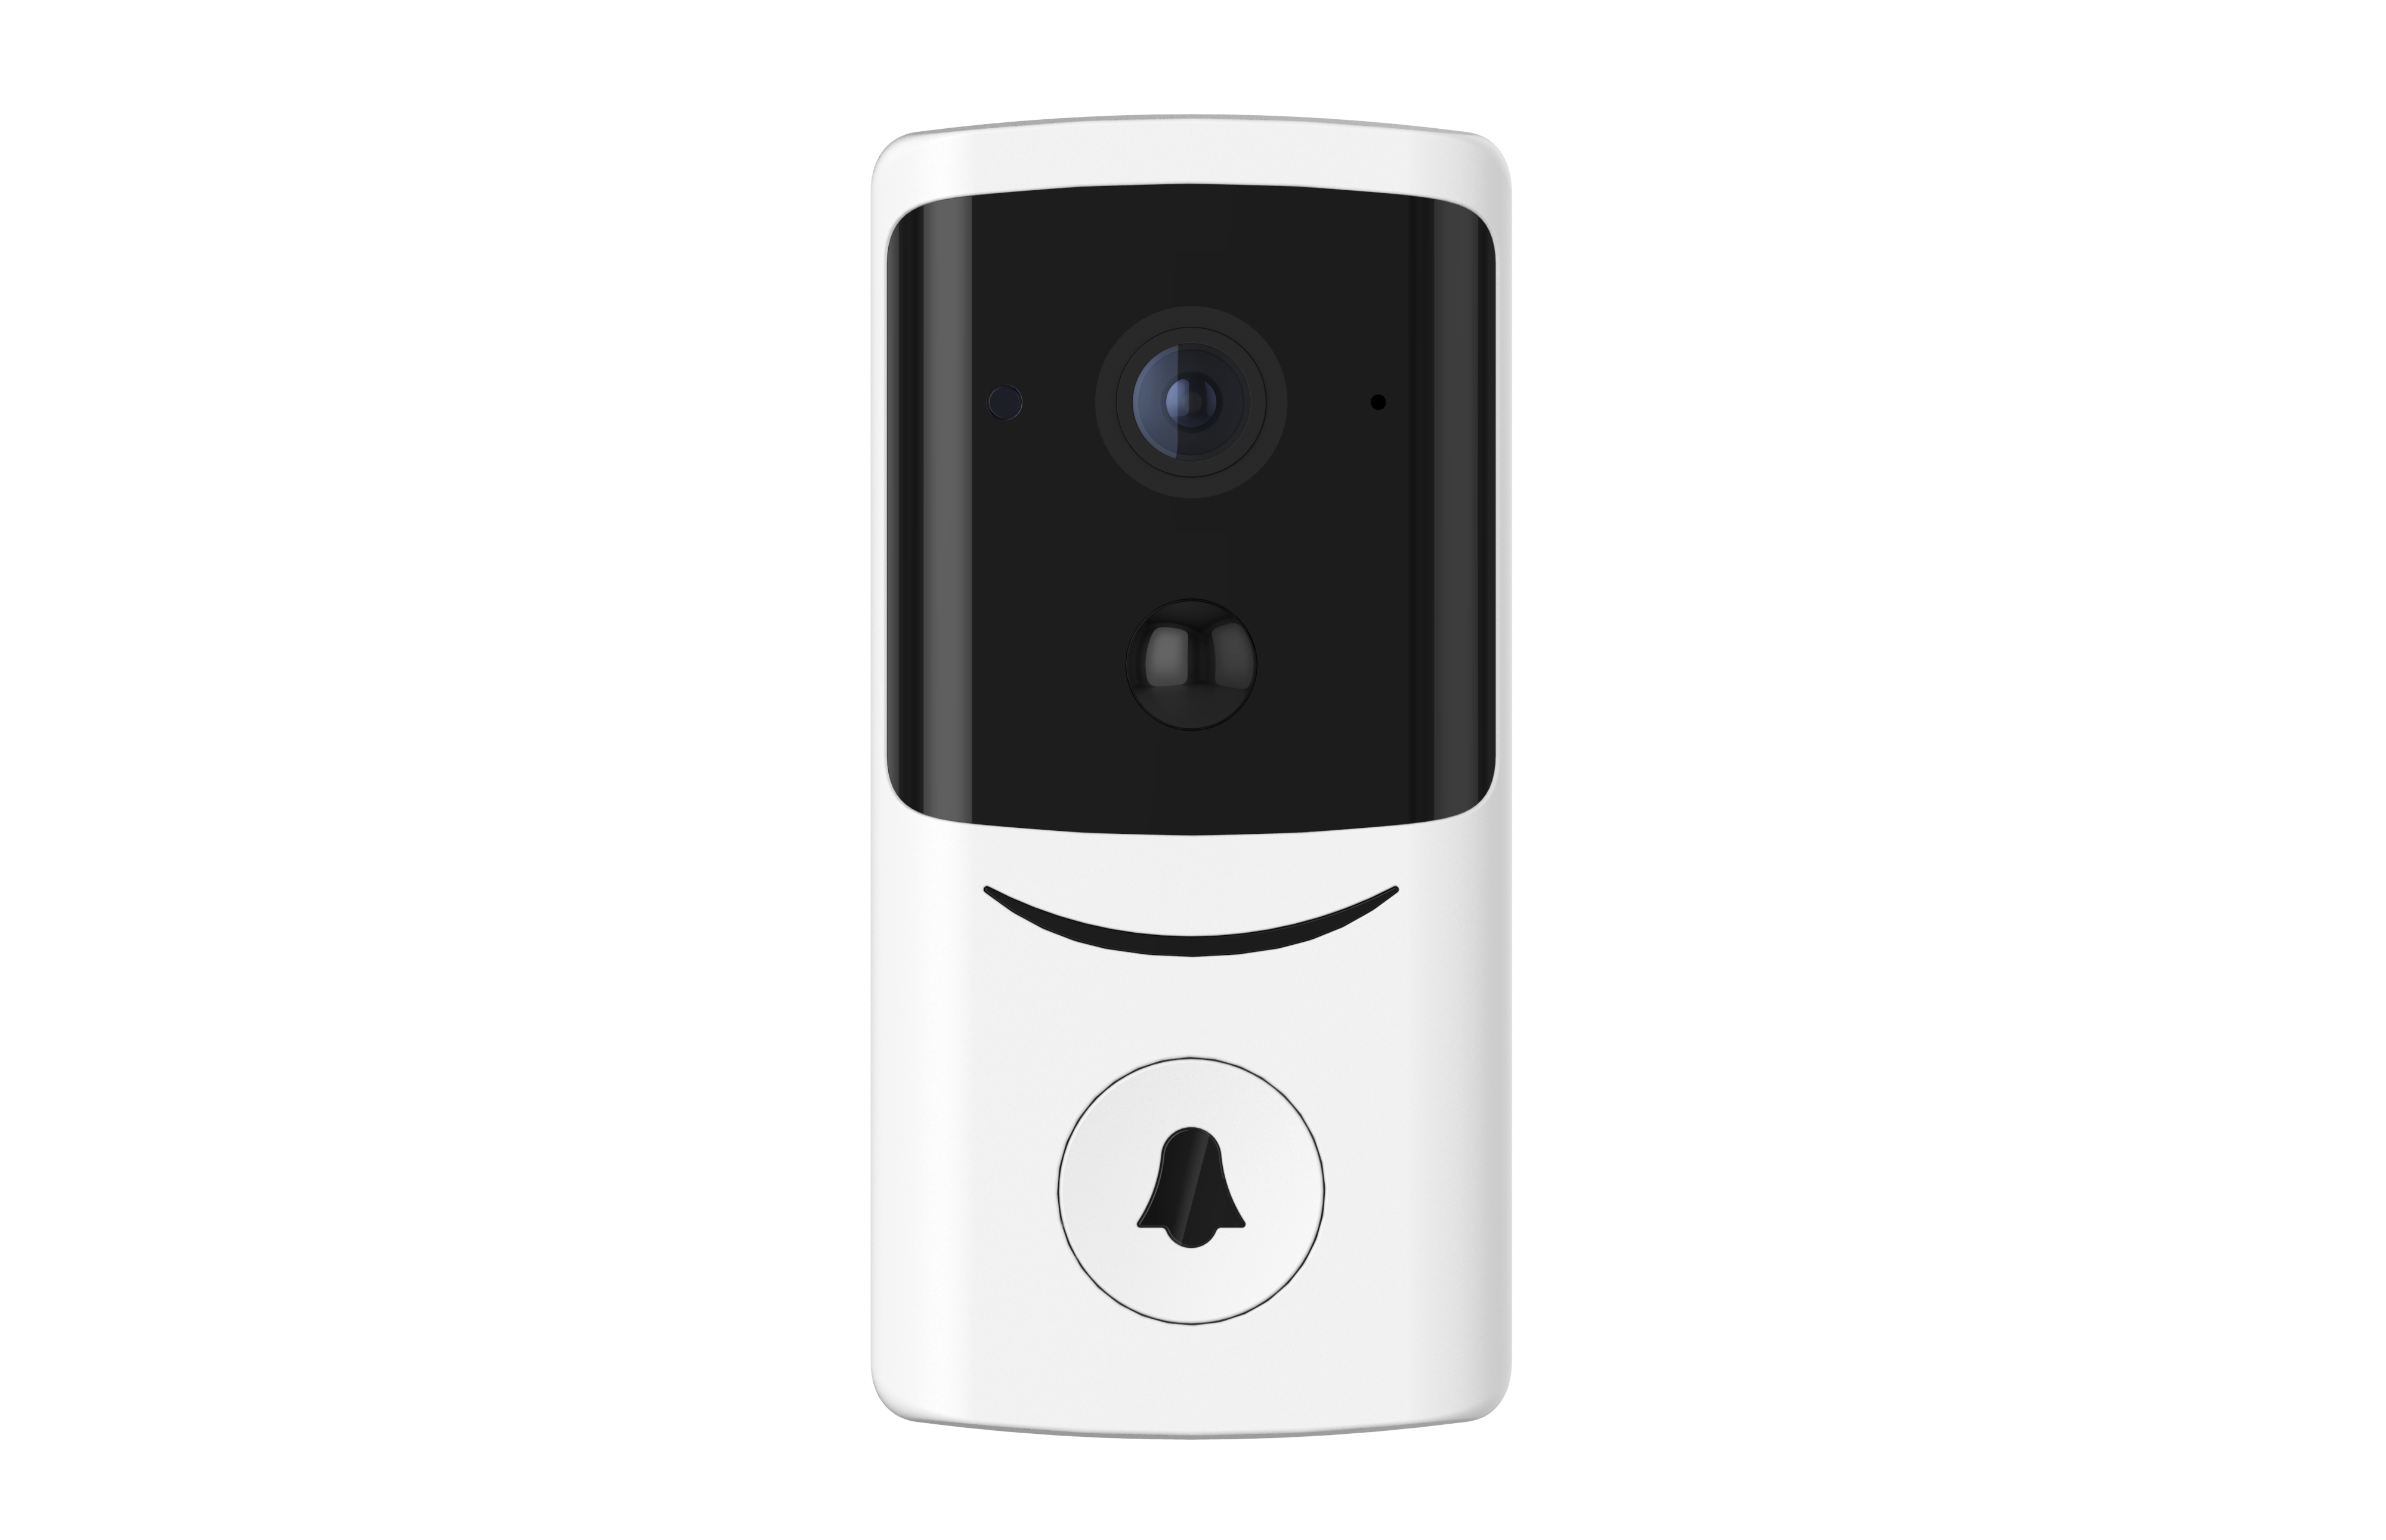 How about this doorbell camera?